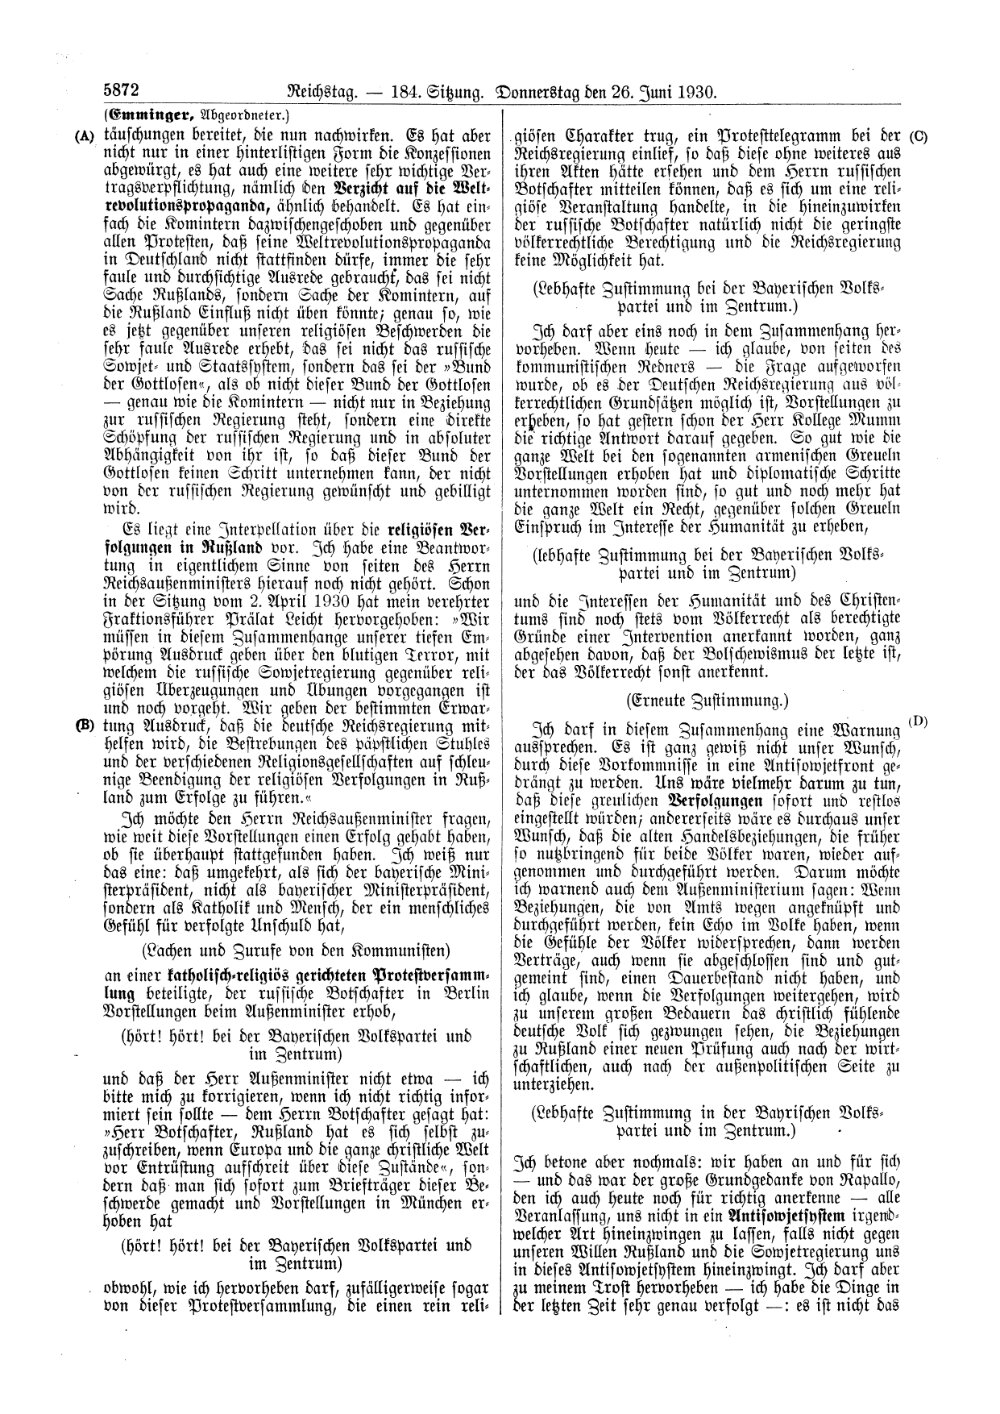 Scan of page 5872